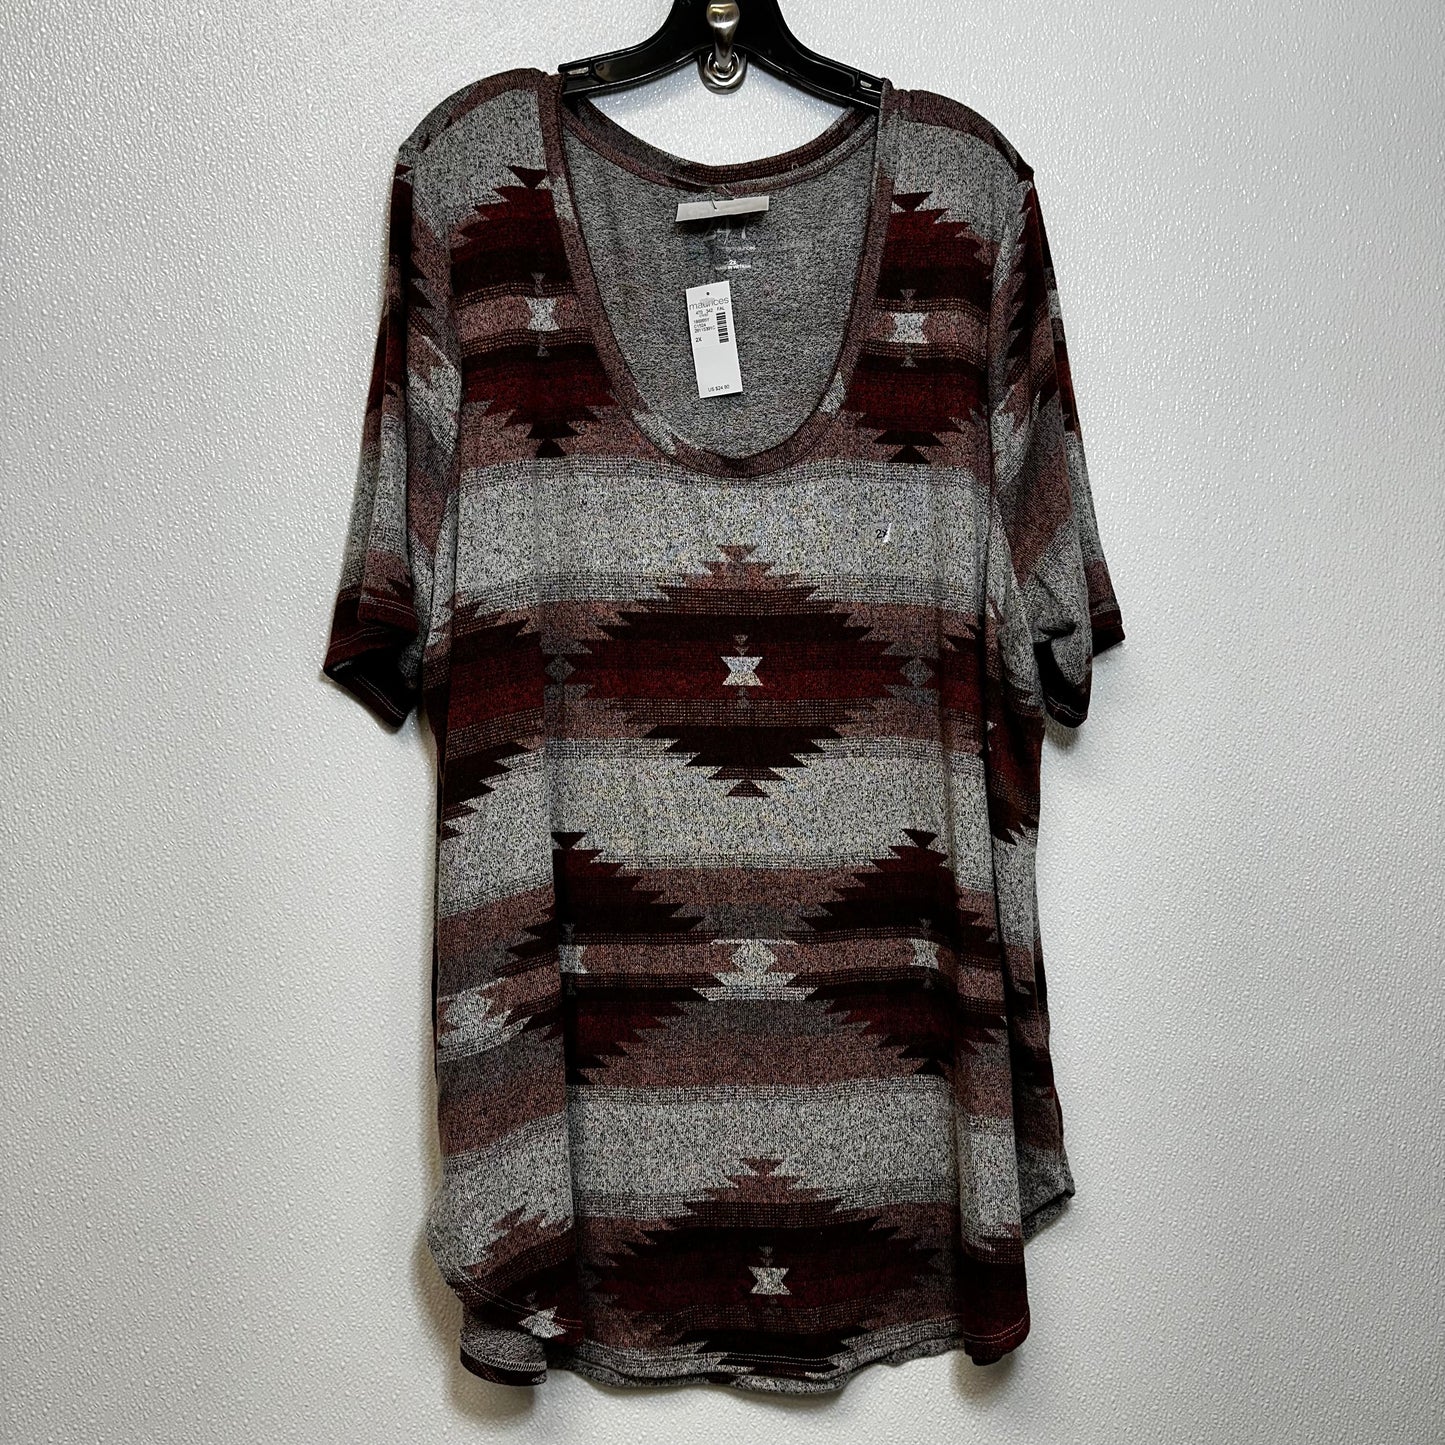 Print Top Short Sleeve Maurices O, Size 2x